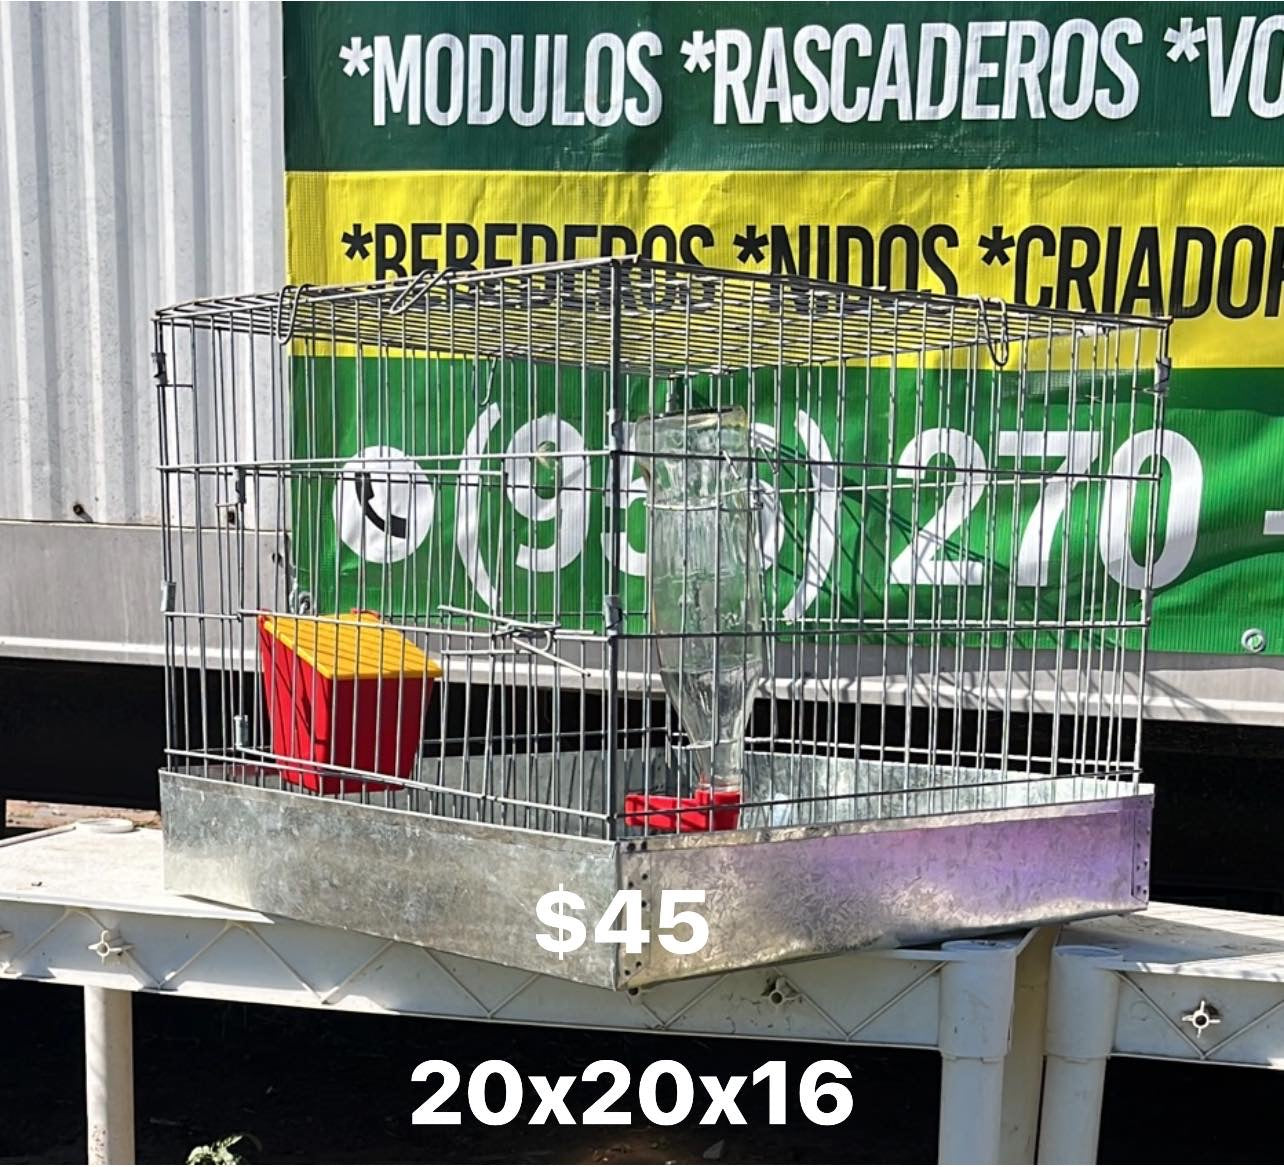 4 Full Cages size 20 x 20 x 16 ea with feeder & driker included. (956)270-2810 for additional info o more options.